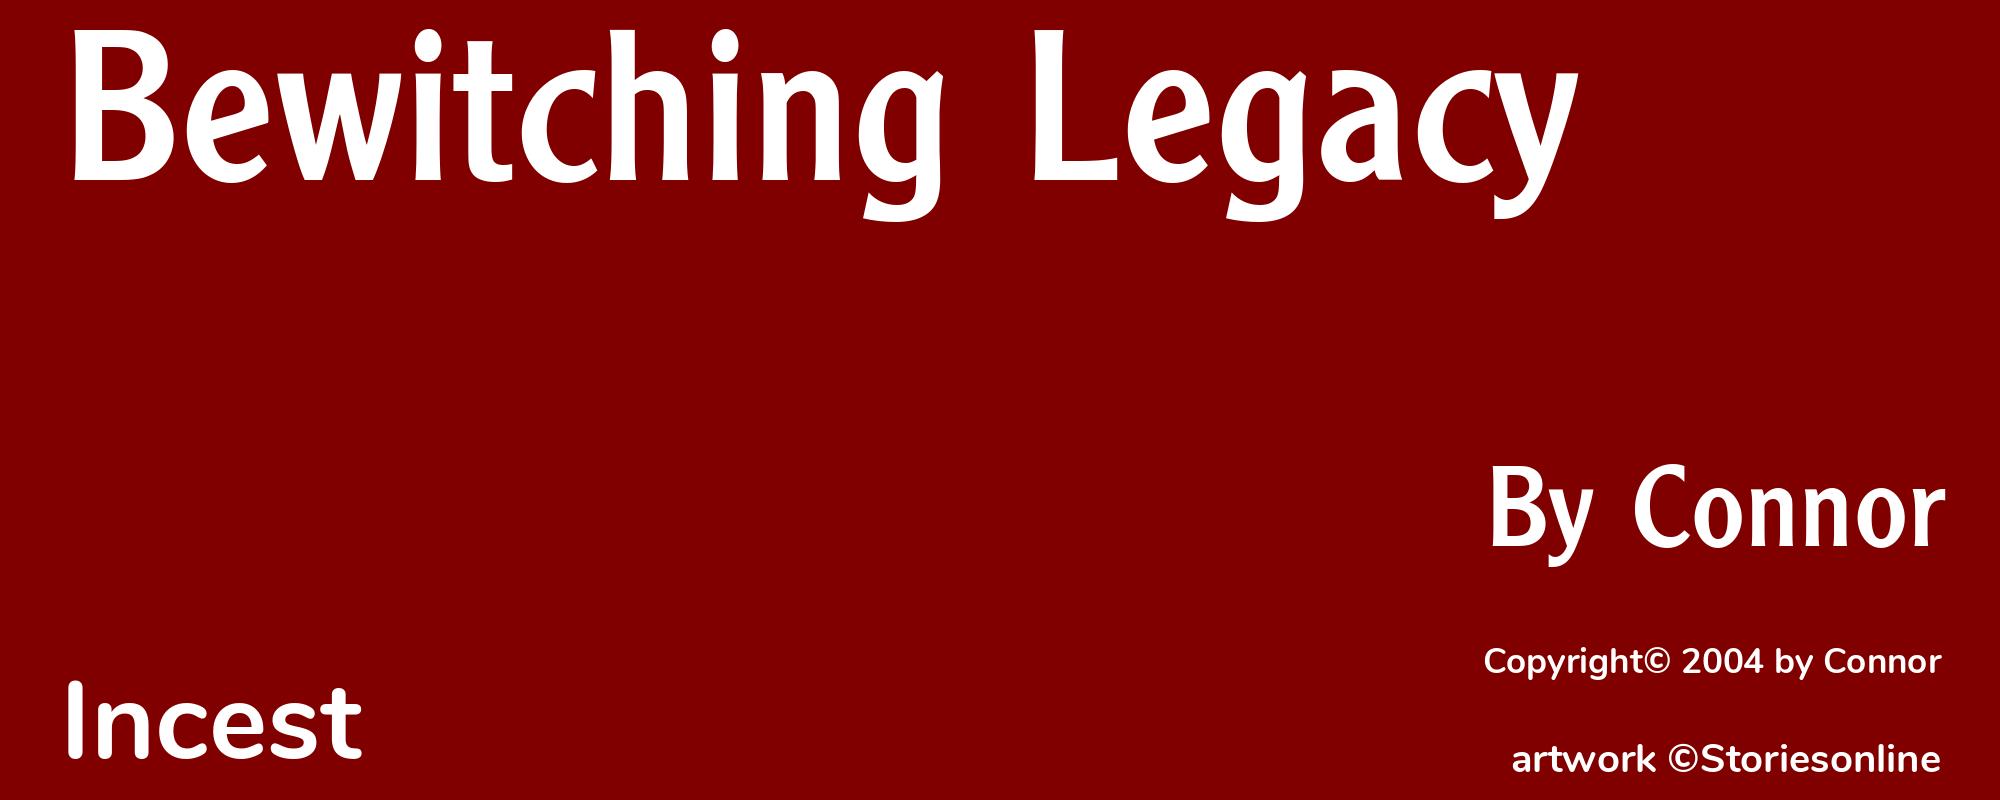 Bewitching Legacy - Cover